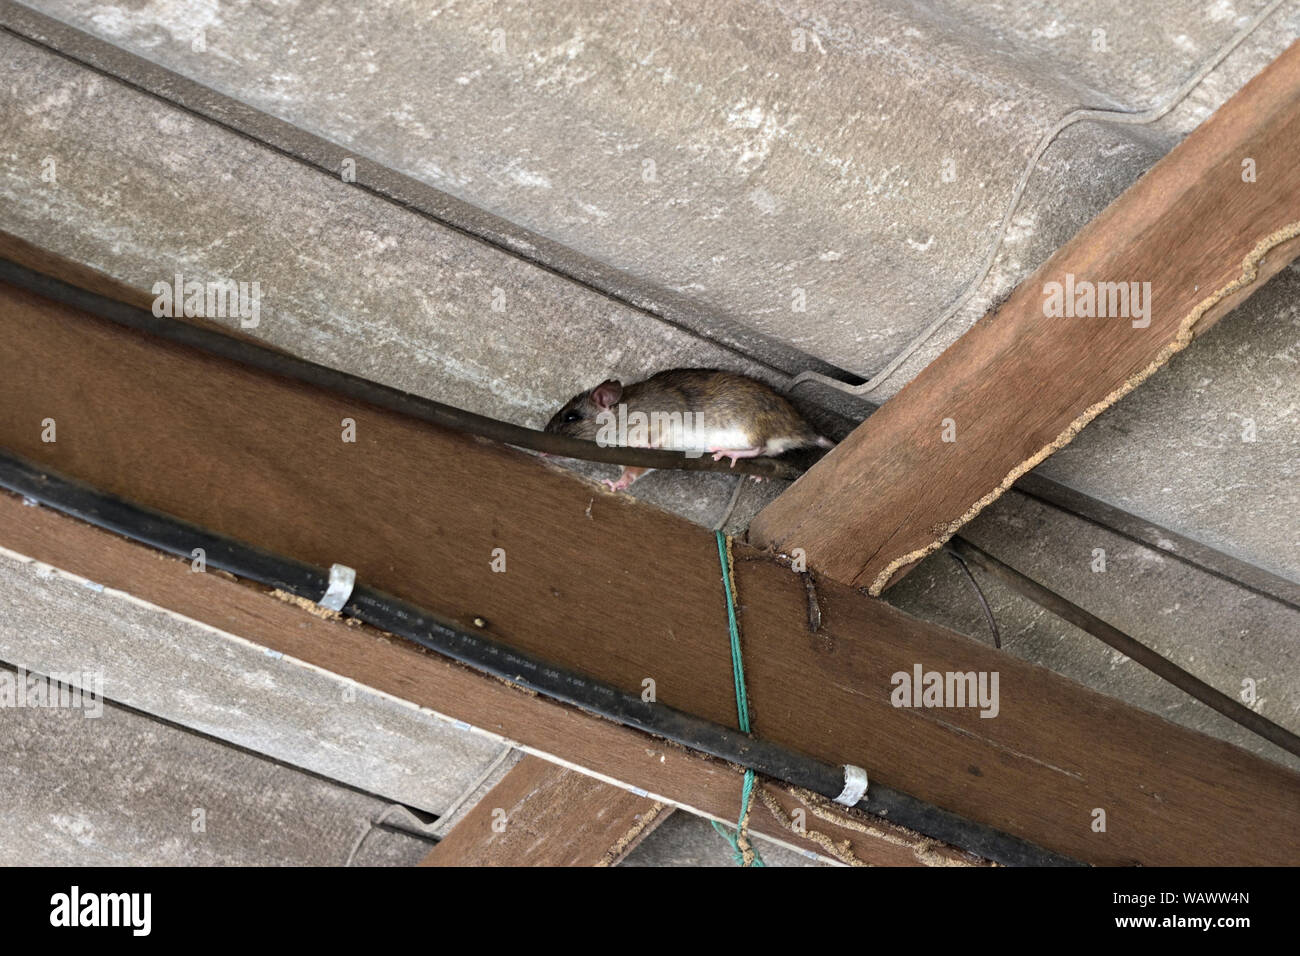 The rat walk in the space between the wooden beam and the roof tiles, Hiding of mice , Rodent damage and disasters when it chew electrical wire Stock Photo